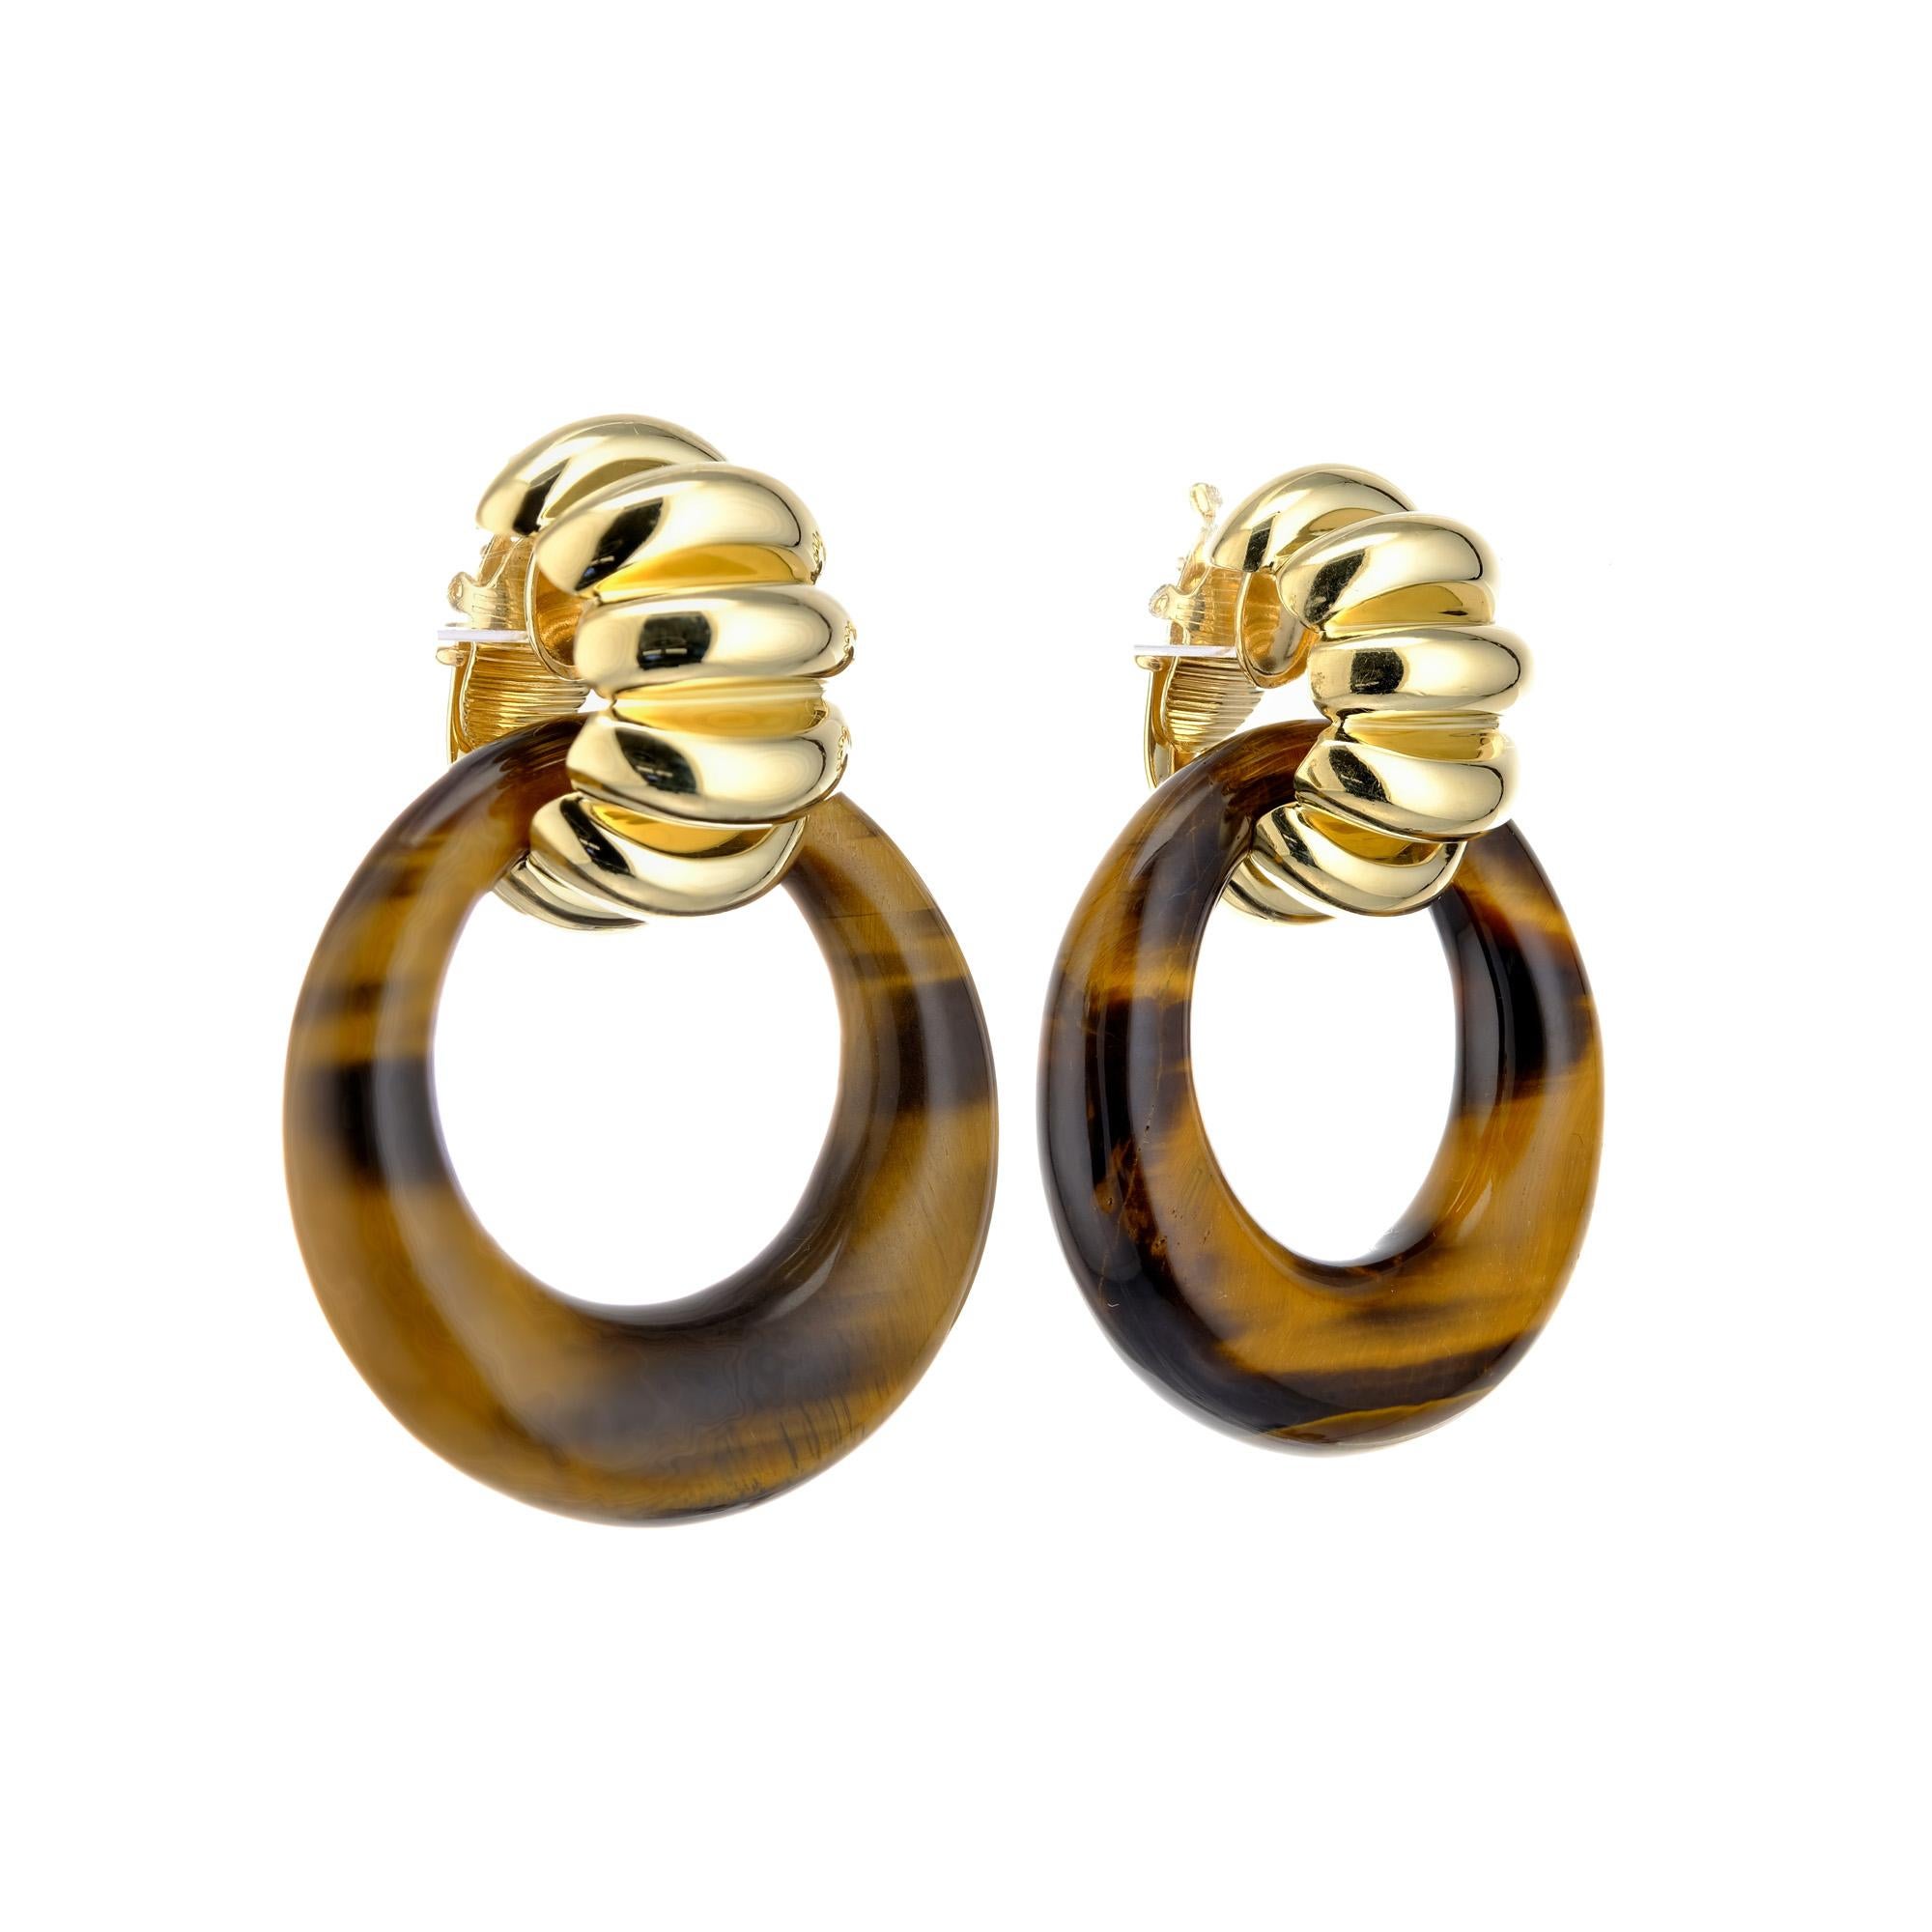 Vintage Tiffany & Co. 14K Yellow Gold Shimp Earrings with Tiger Eye door knocker dangles that are removable. Shrimp clip post tops can be worn with or without dangles.

2 Round Tiger Eye Hoops, 37mm, Yellow Brown.
14k Yellow Gold
Stamped: